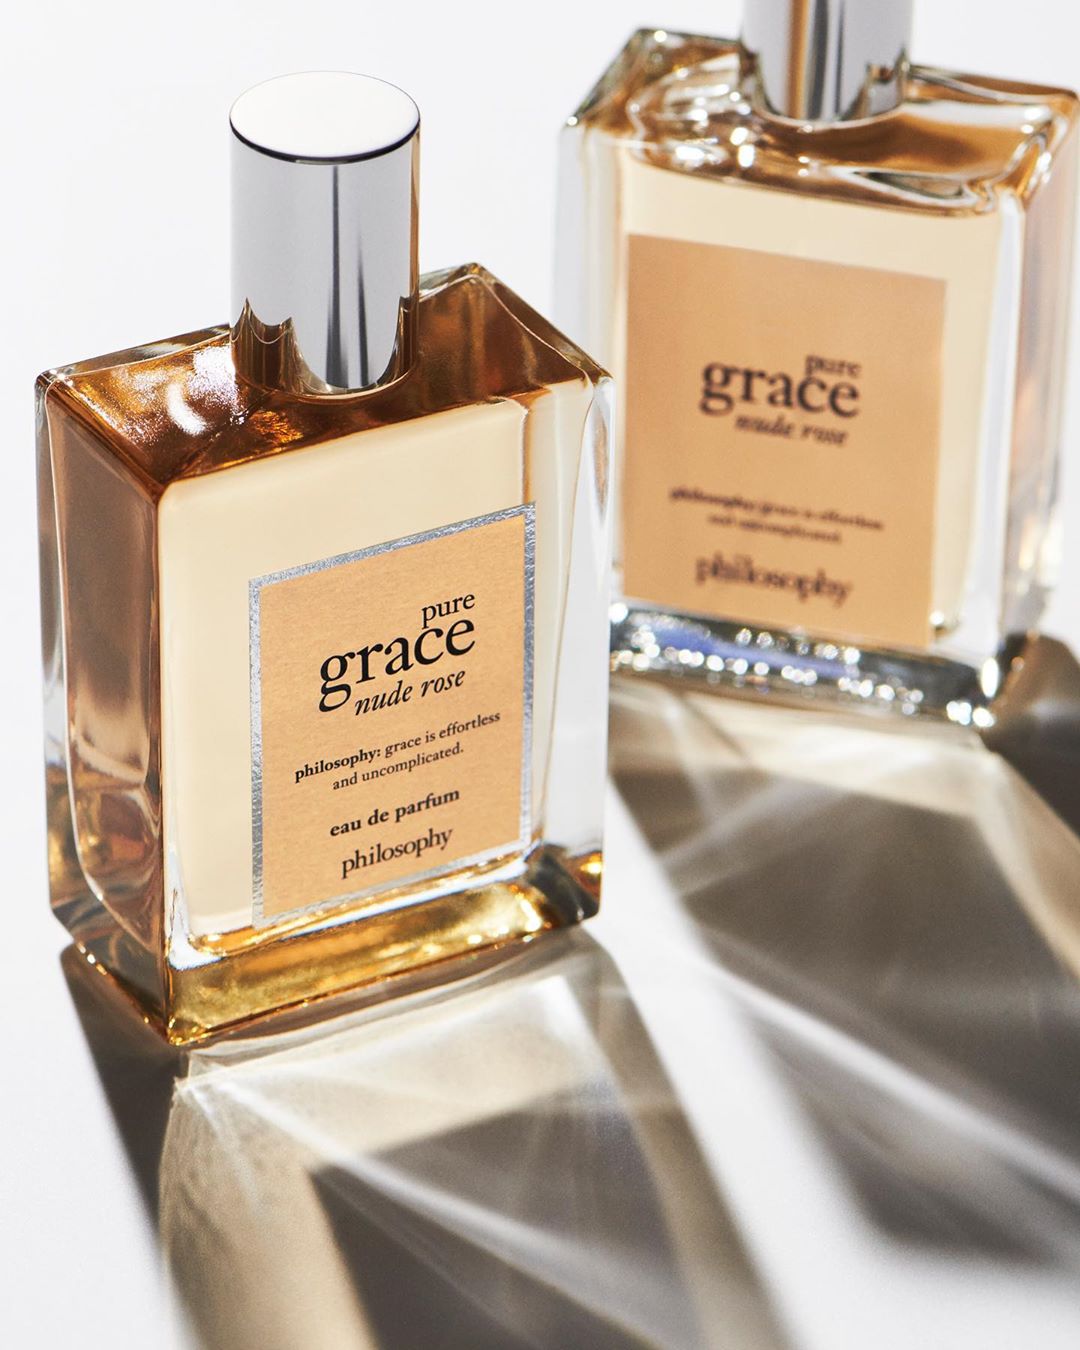 25 New Fragrances To Add To Your Vanity This Fall